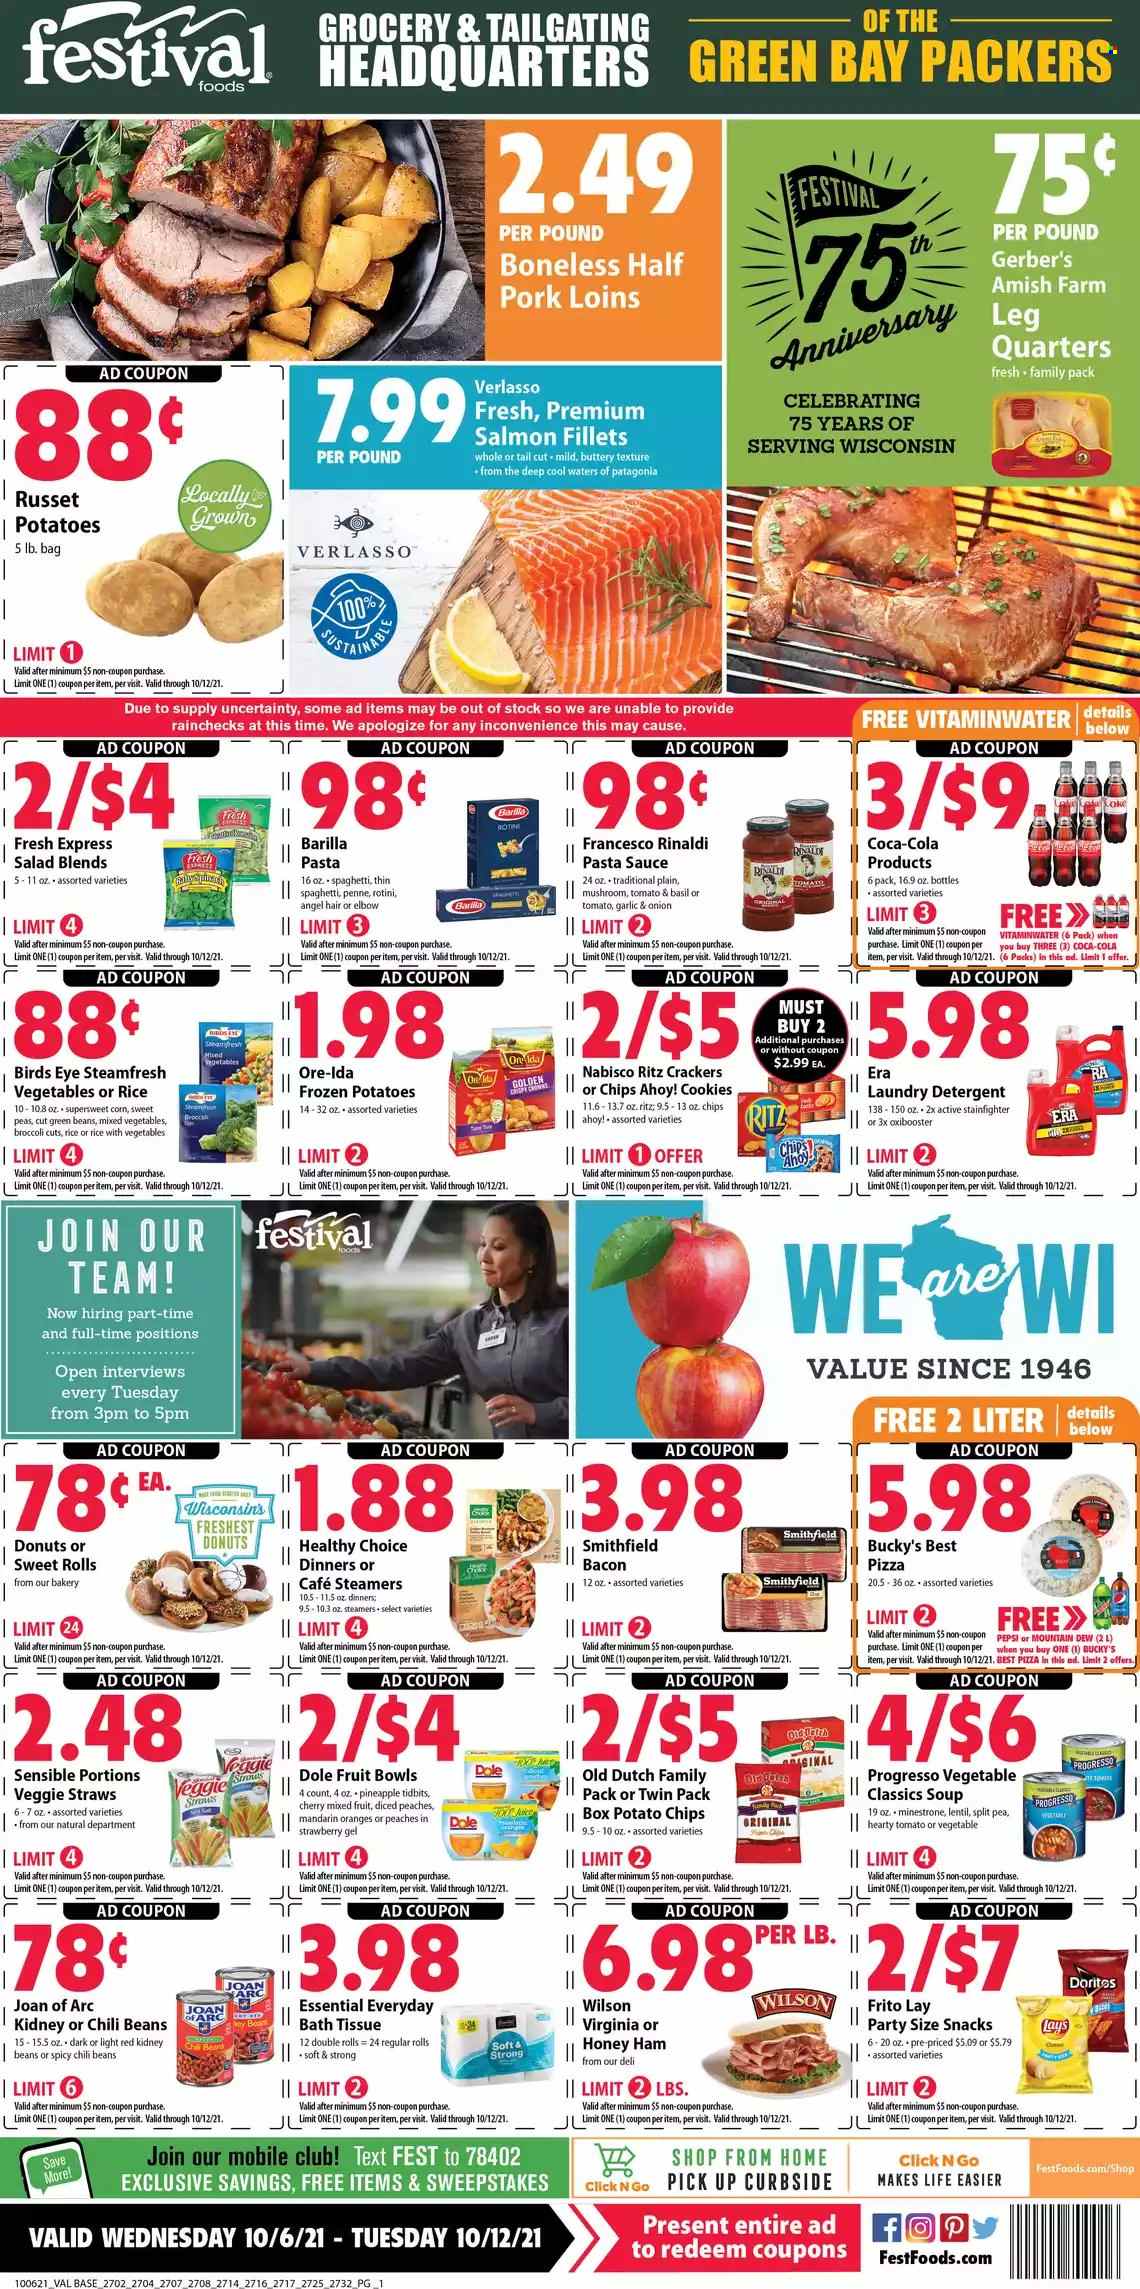 thumbnail - Festival Foods Flyer - 10/06/2021 - 10/12/2021 - Sales products - donut, sweet rolls, broccoli, corn, green beans, russet potatoes, salad, Dole, mandarines, pineapple, cherries, oranges, salmon, salmon fillet, spaghetti, pizza, pasta sauce, soup, sauce, Bird's Eye, Barilla, Progresso, Healthy Choice, bacon, ham, mixed vegetables, Ore-Ida, cookies, snack, crackers, Chips Ahoy!, RITZ, Doritos, Gerber, potato chips, Lay’s, veggie straws, chili beans, penne, Coca-Cola, Mountain Dew, Pepsi, bath tissue, detergent, laundry detergent. Page 1.